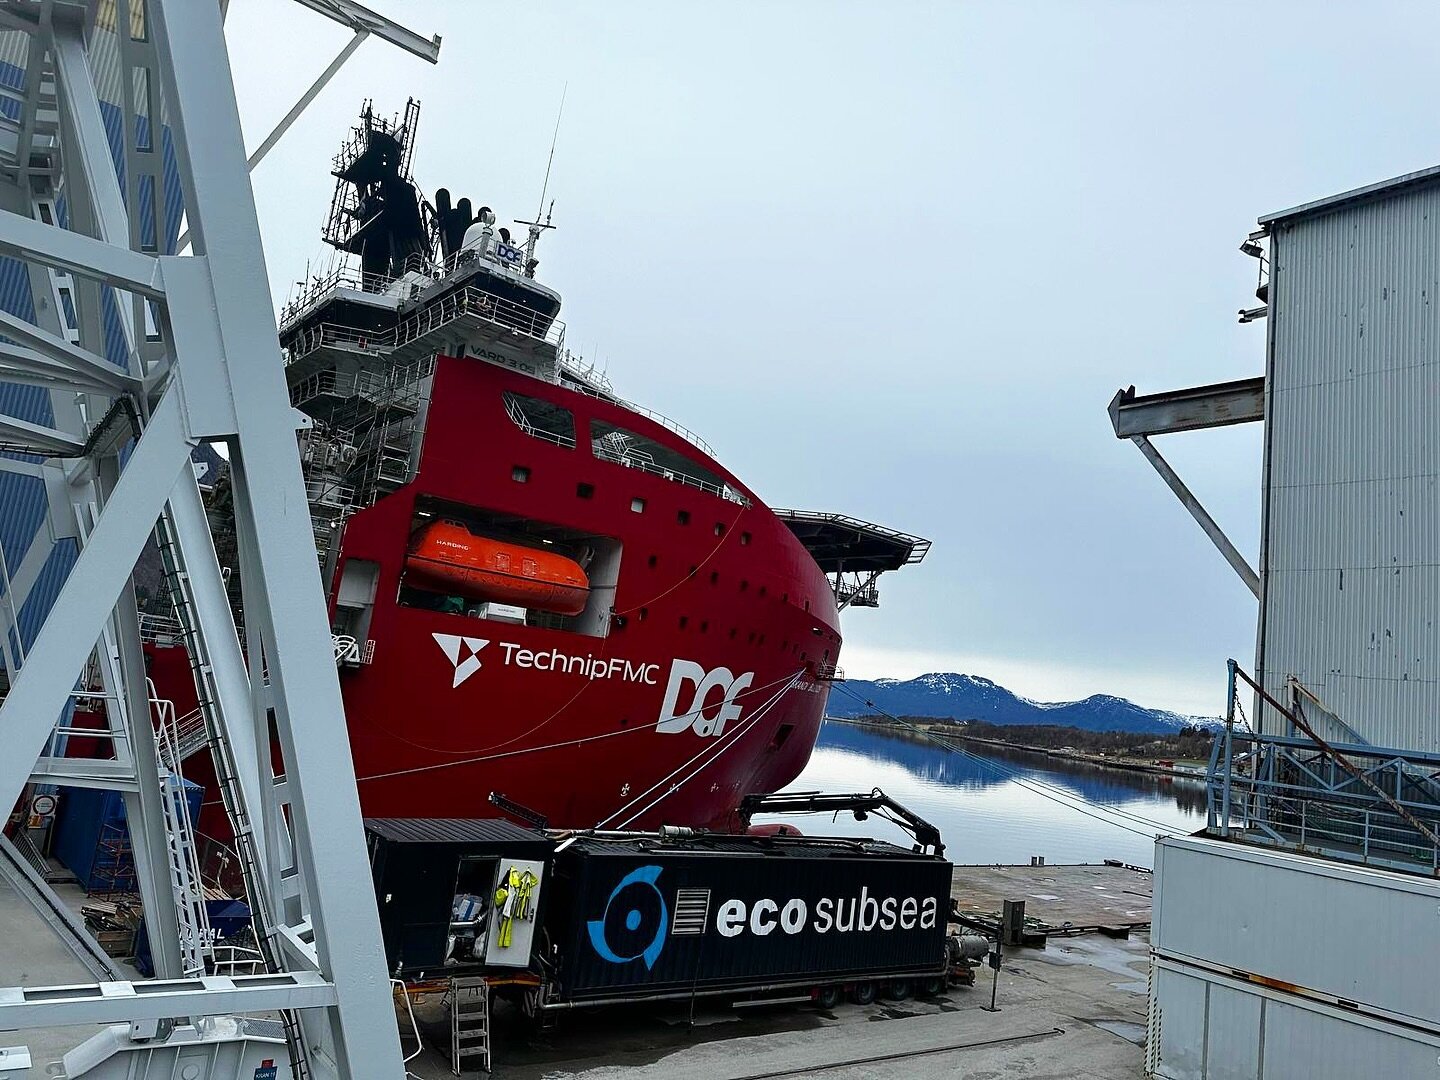 Skandi B&uacute;zios Hull Cleaning operation at the VARD Langsten Shipyard today 🌱 This impressive vessel will after removing all biofouling be saving tonnes of fuel and CO2 emissions due to the smooth and clean surface ✅
#hullcleaning #sustainable 